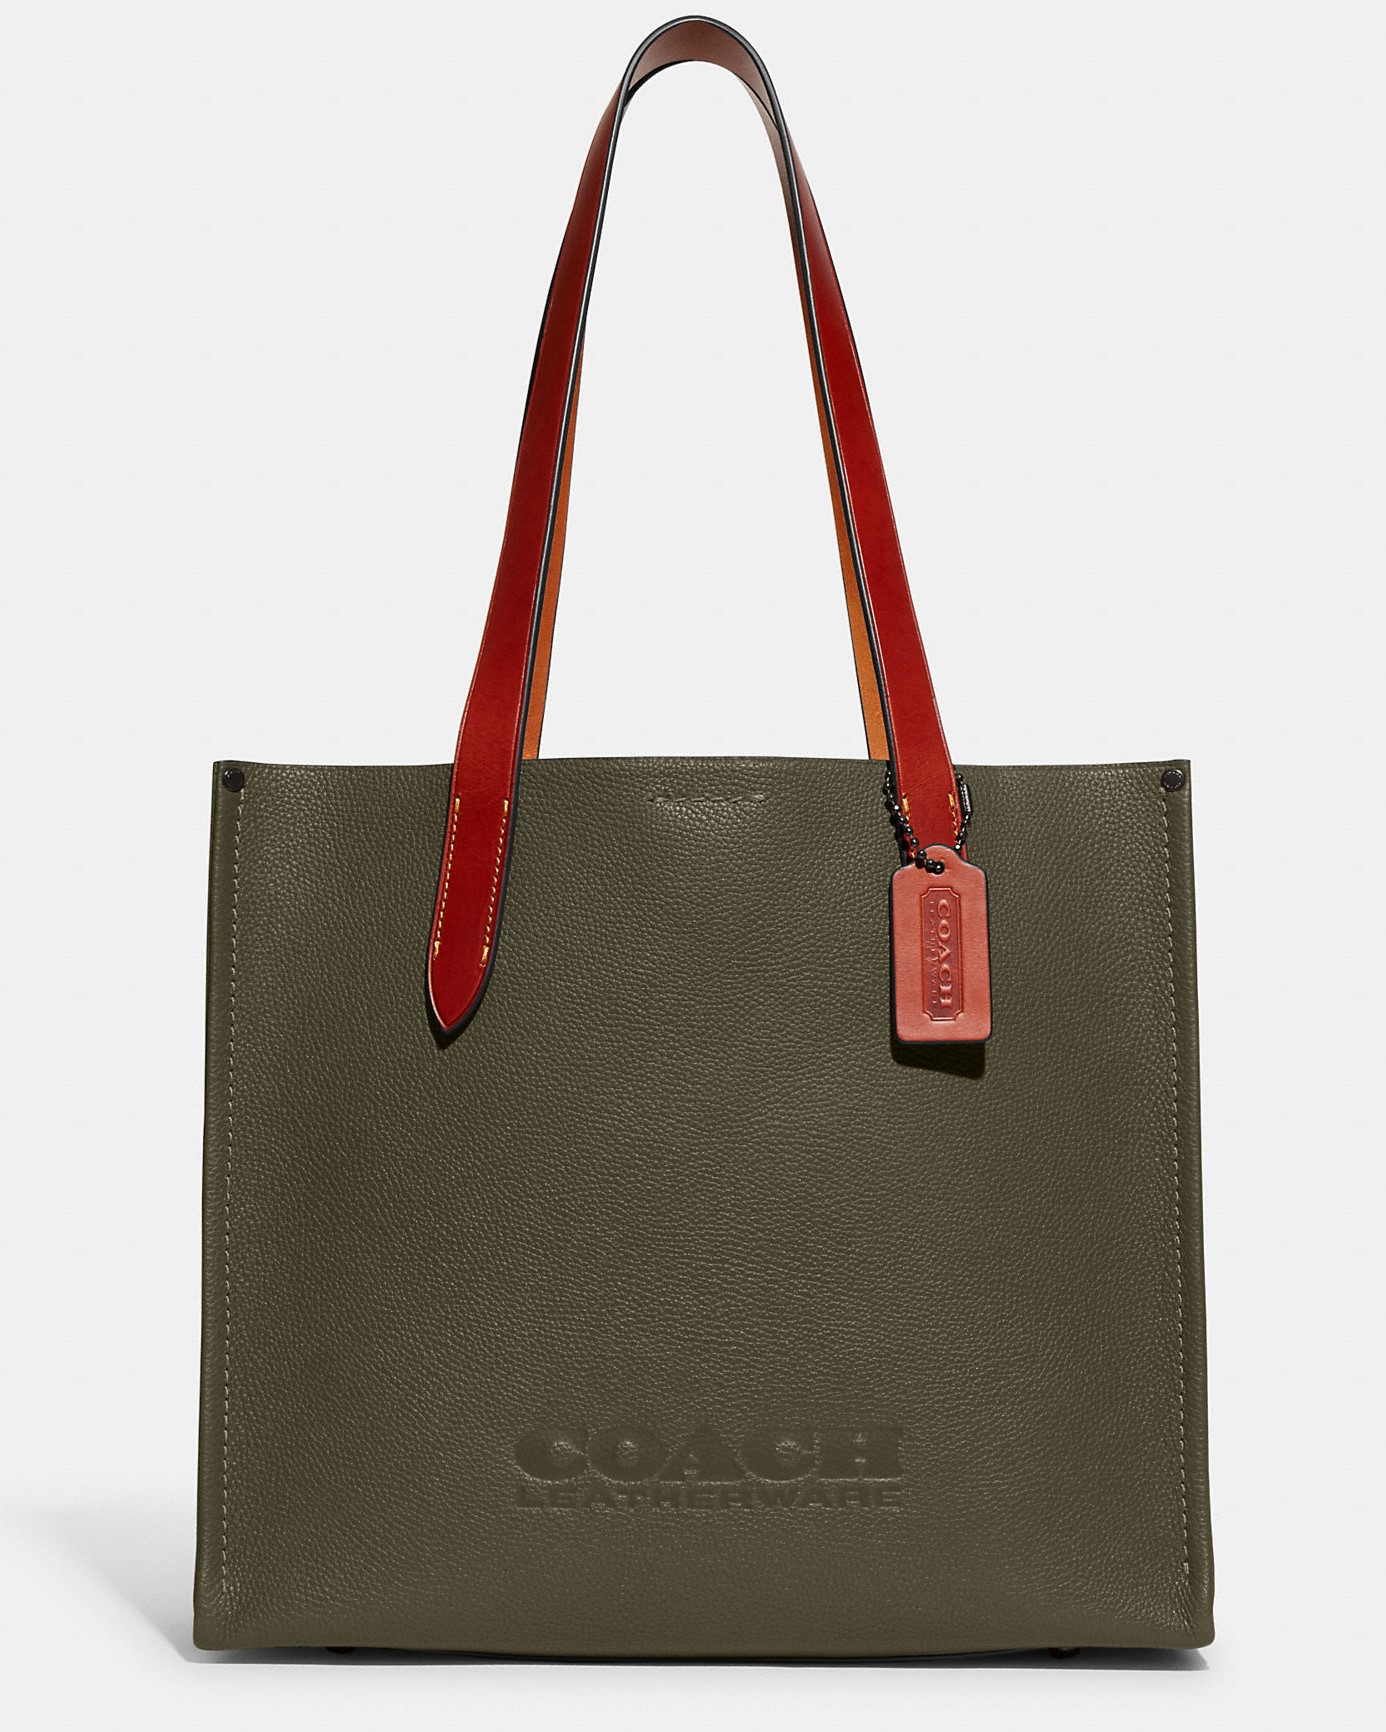 TÚI TOTE COACH RELAY TOTE 34 POLISHED PEBBLE LEATHER BAG CH757 7